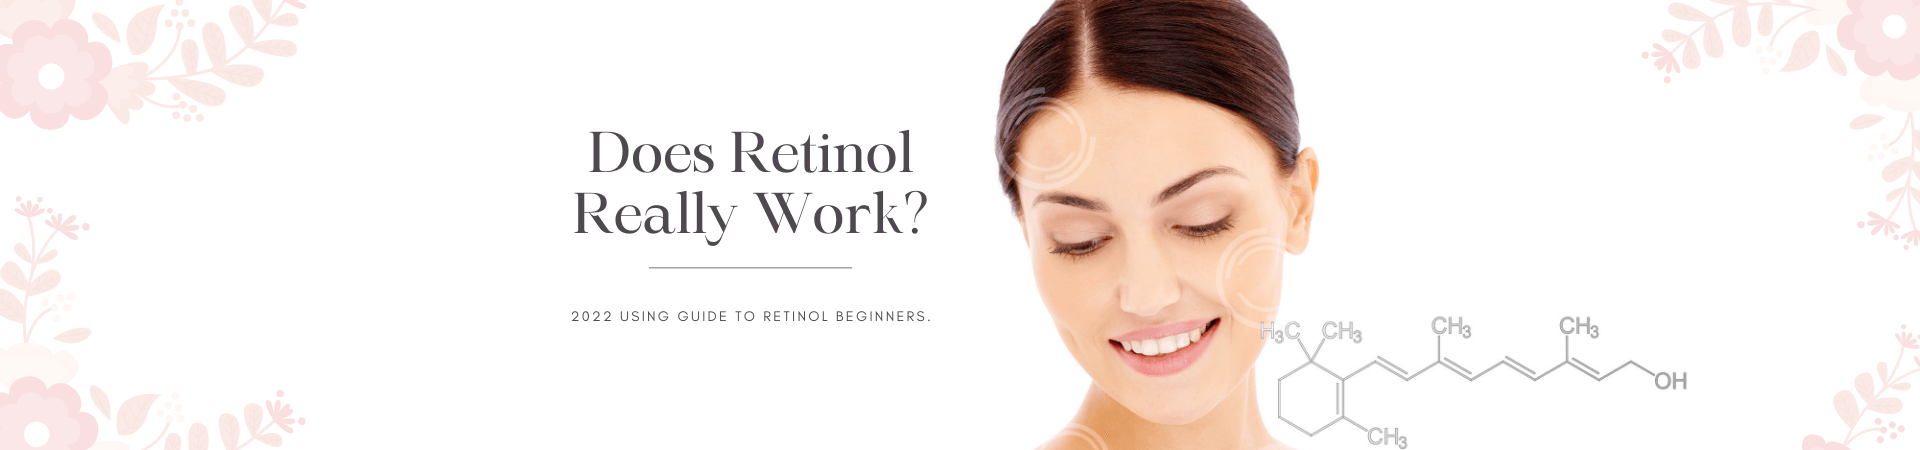 2022 Using Guide To Retinol Beginners. Does Retinol Really Work? - 1st Mini Skincare Fridges With LED Mirror | COOSEON®